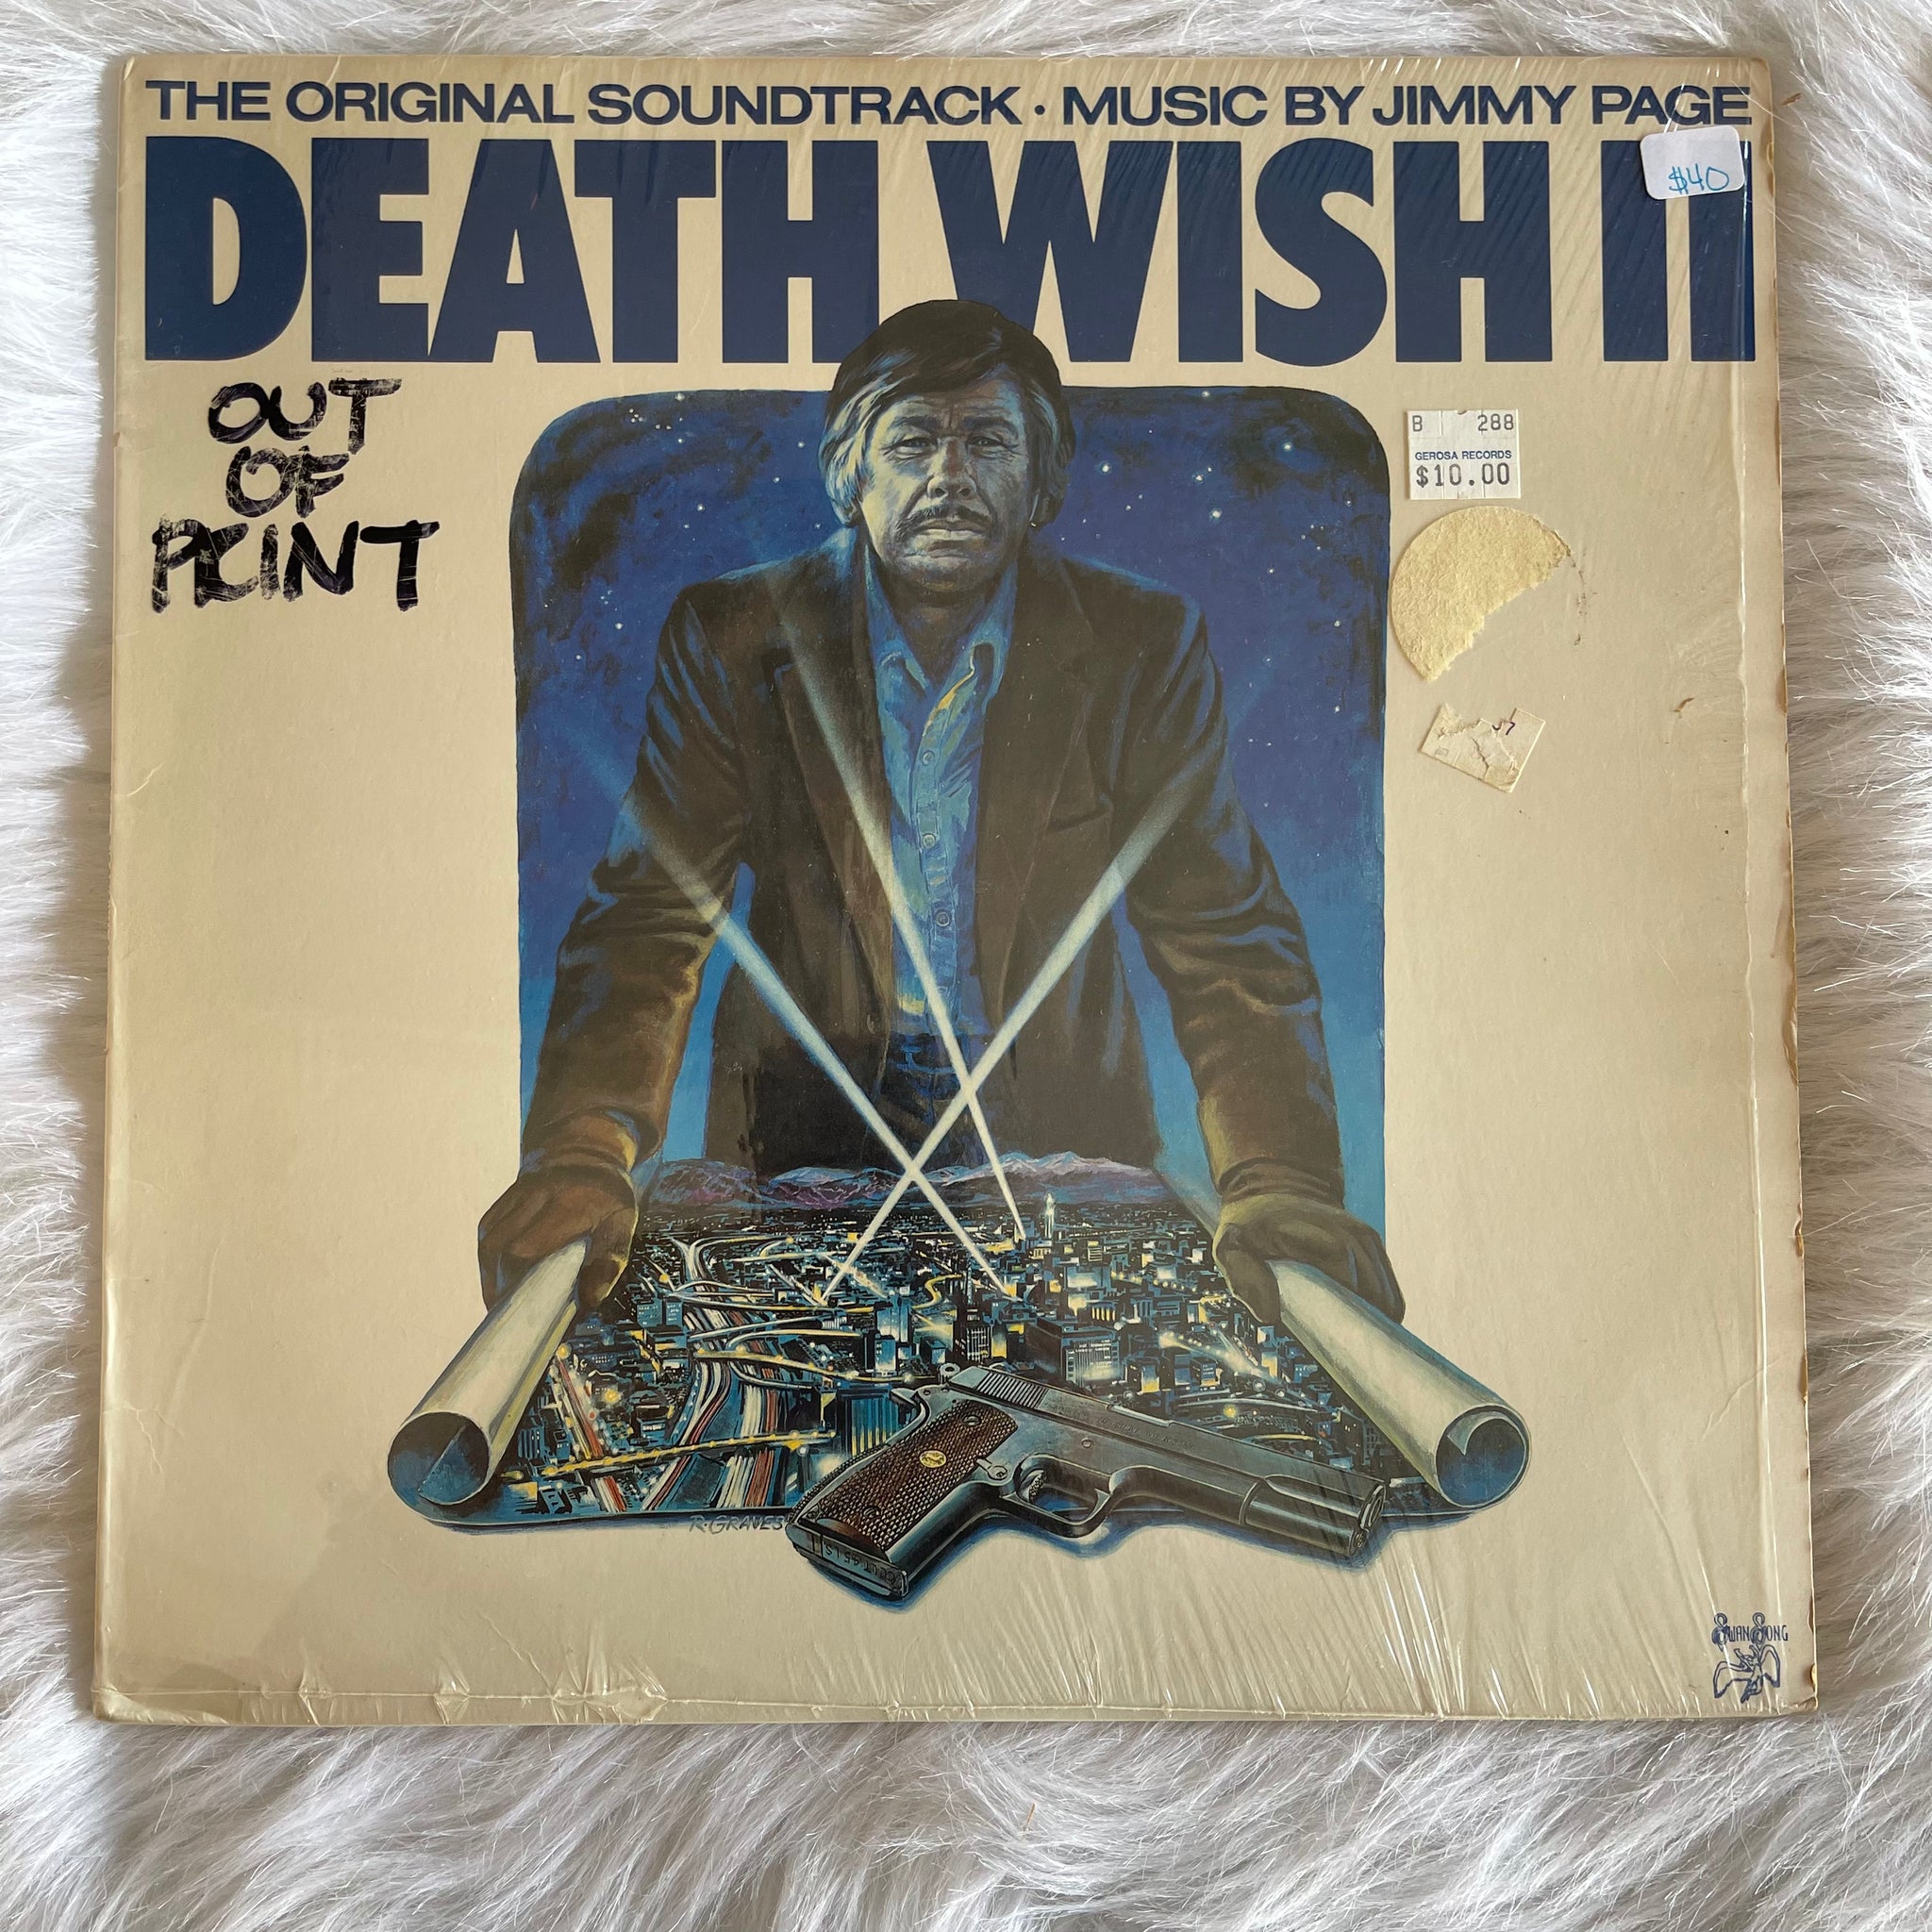 Death Wish II-The Original Soundtrack/Music by Jimmy Page